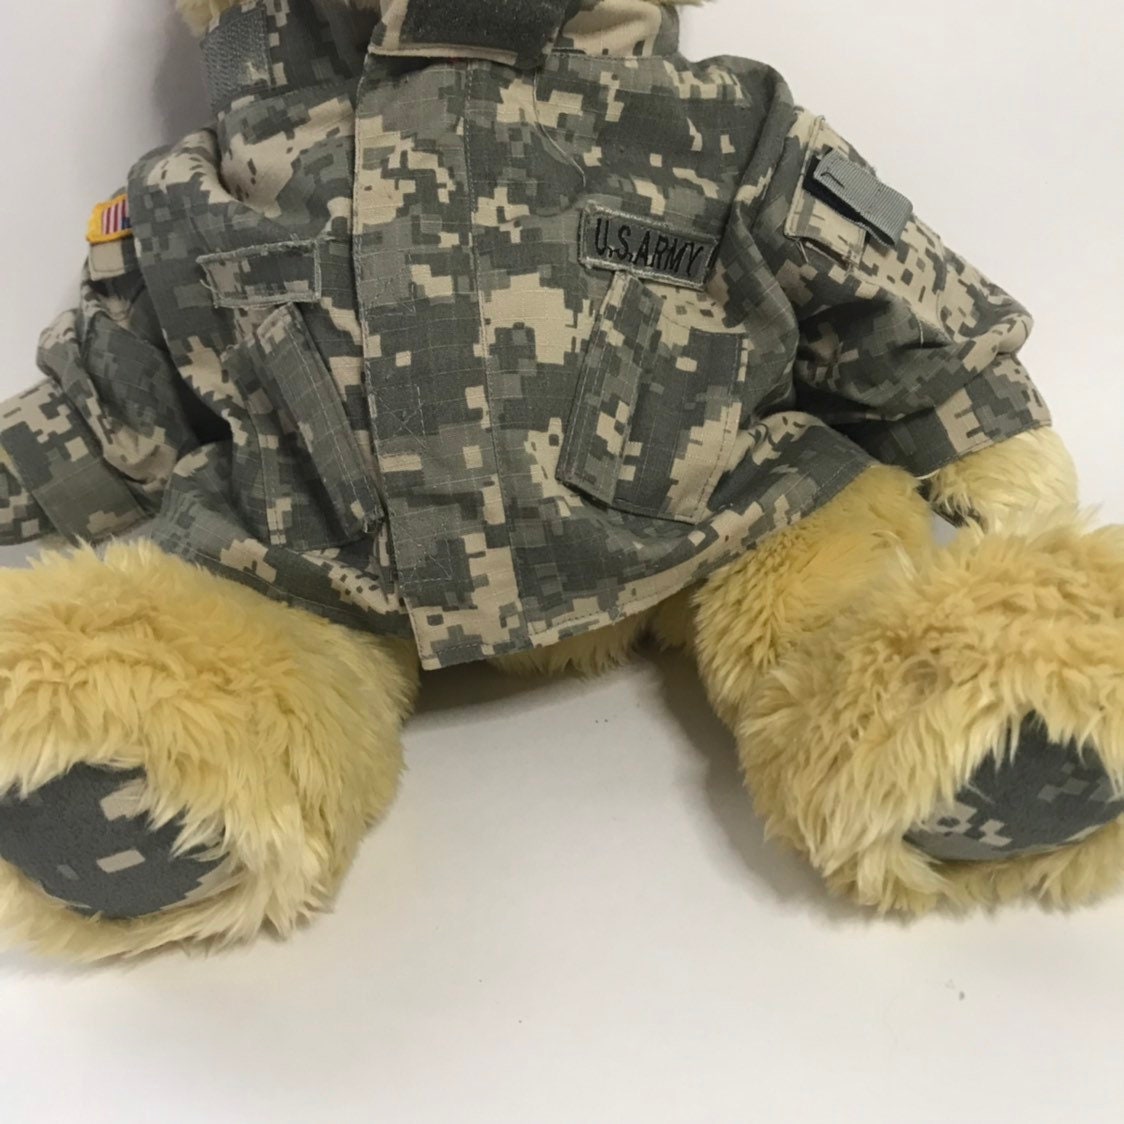 Vintage Teddy Bear Forces of America 1989 IRA Green US Army | Etsy